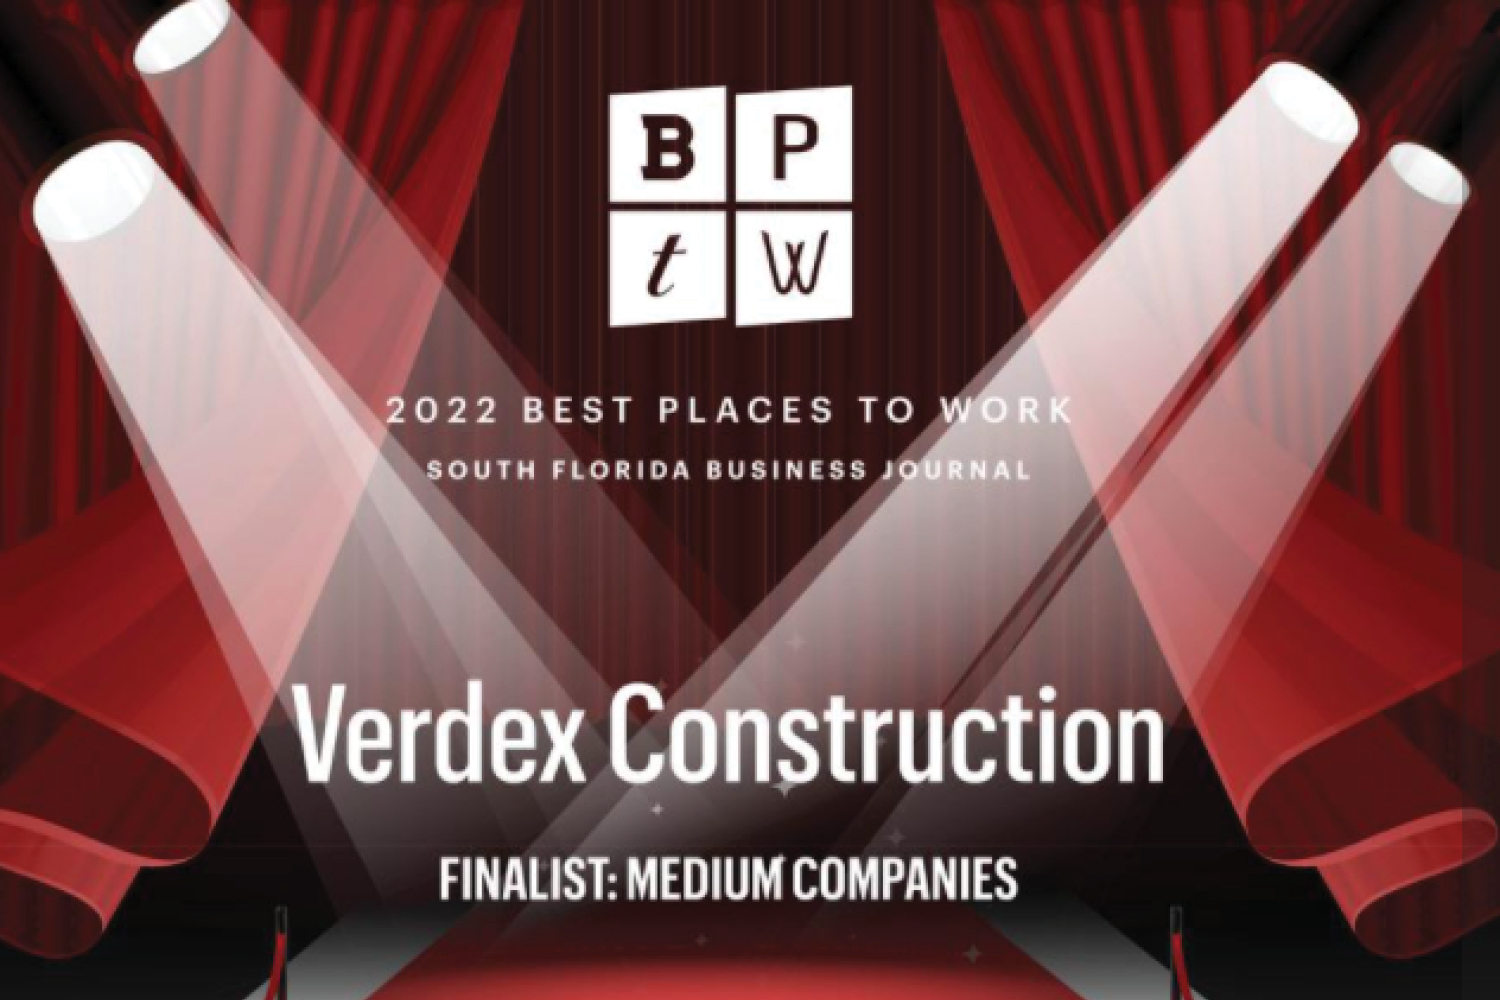 2022 Best Places to Work in South Florida